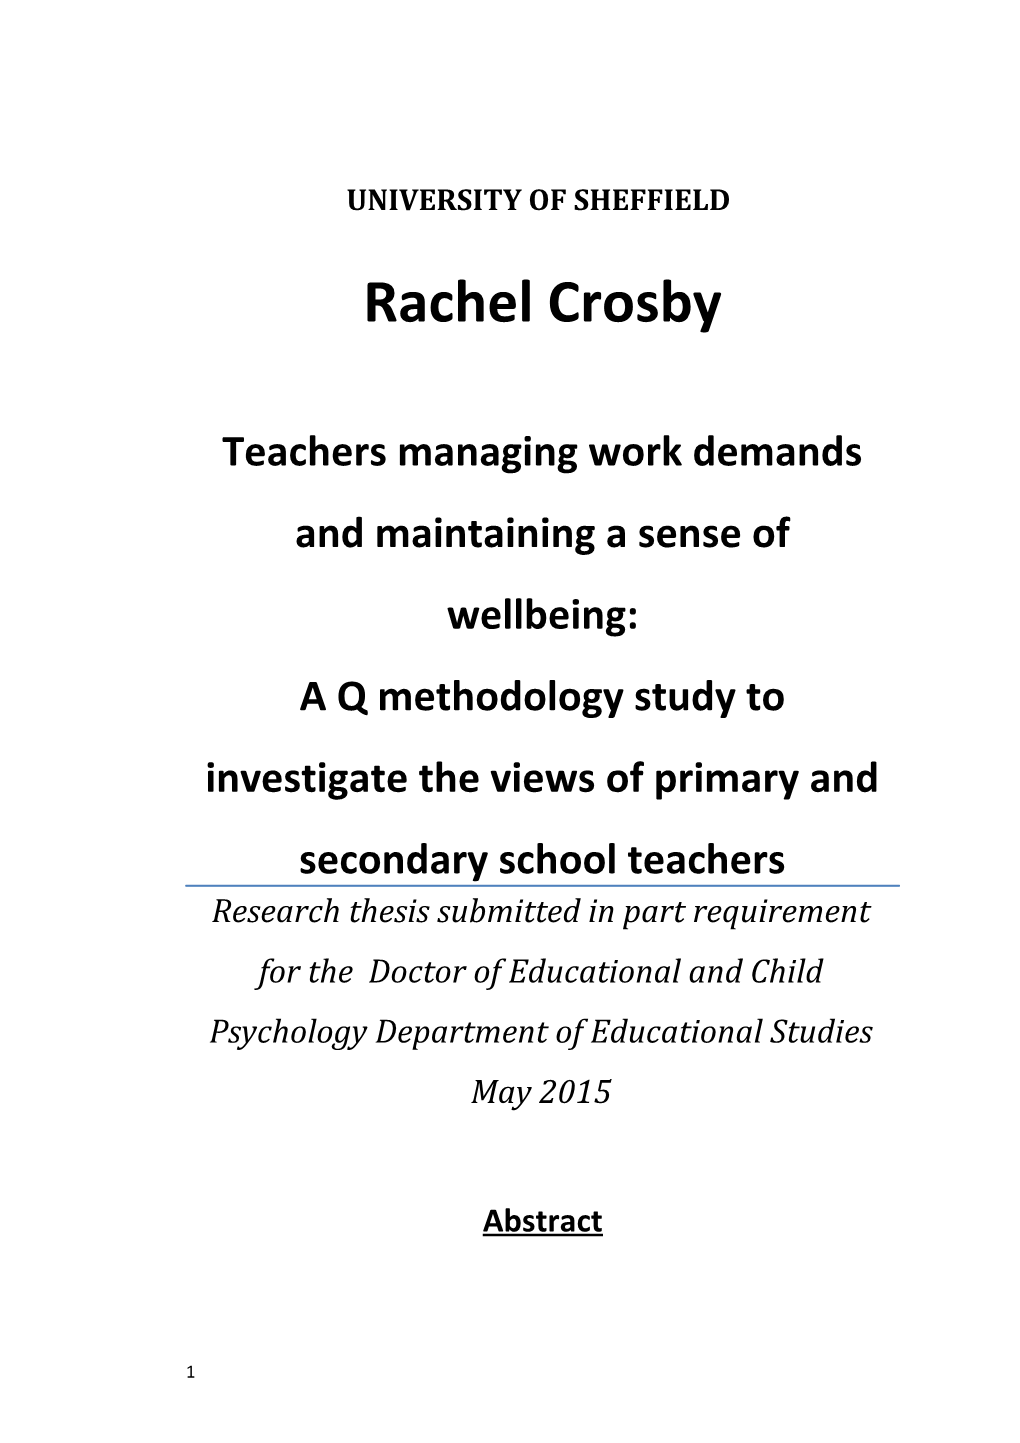 Teachers Managing Work Demands and Maintaining a Sense of Wellbeing: a Q Methodology Study